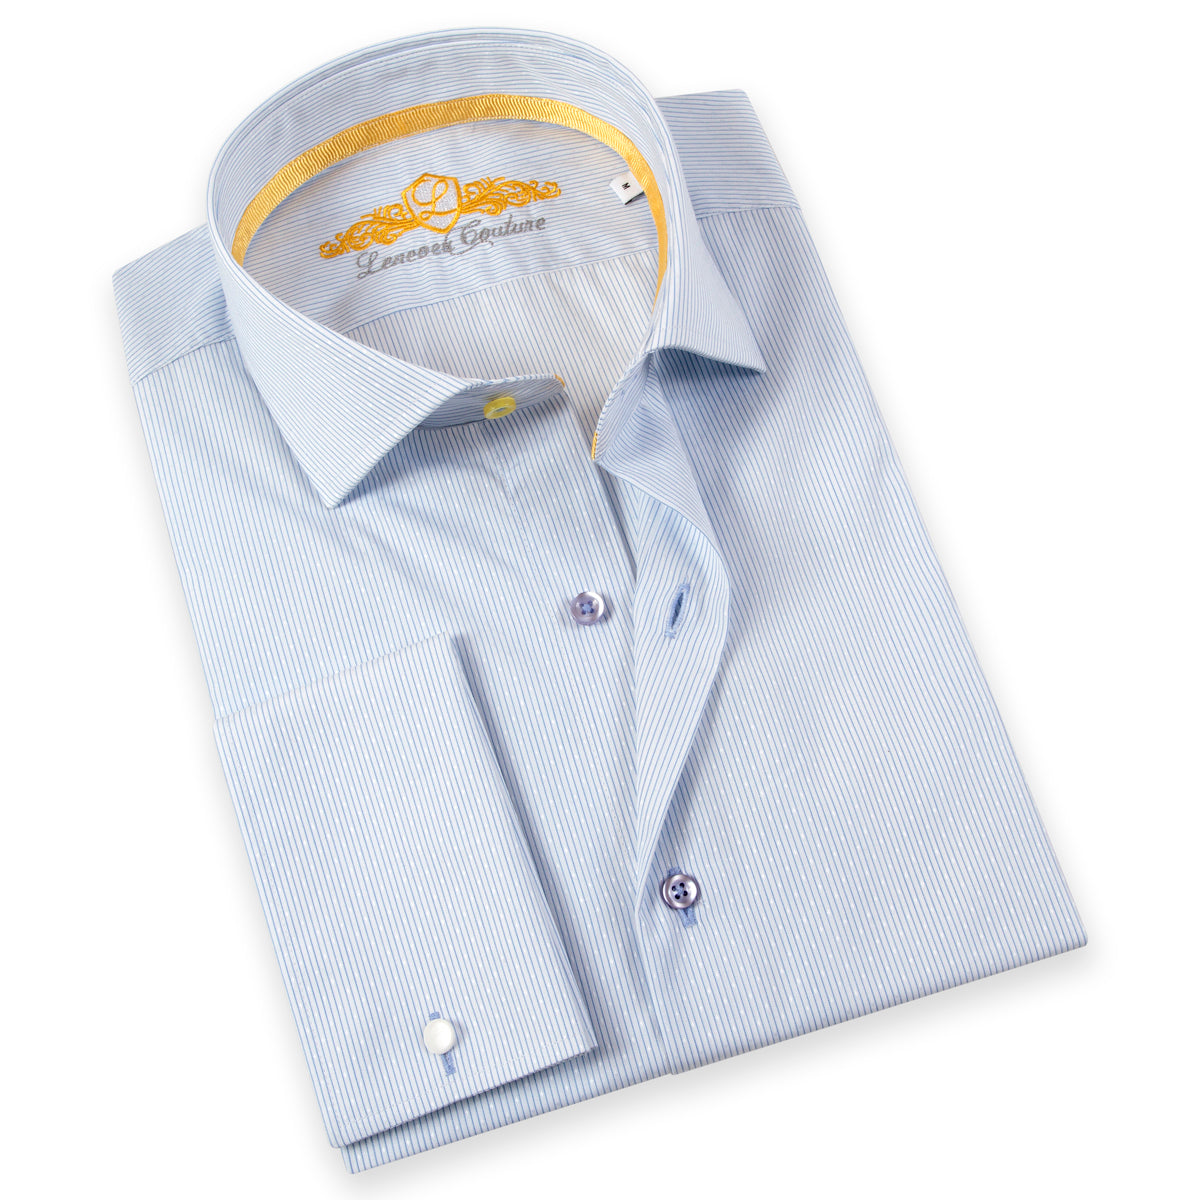 Made up of a beautiful Italian 2-Ply cotton, this elegant dress shirt from Leneveu Couture is a must-have for your businesswear wardrobe. With a subtle blue pinstripe pattern and french cuffs, this dress shirt looks great when paired with a solid or checkered navy blue suit.